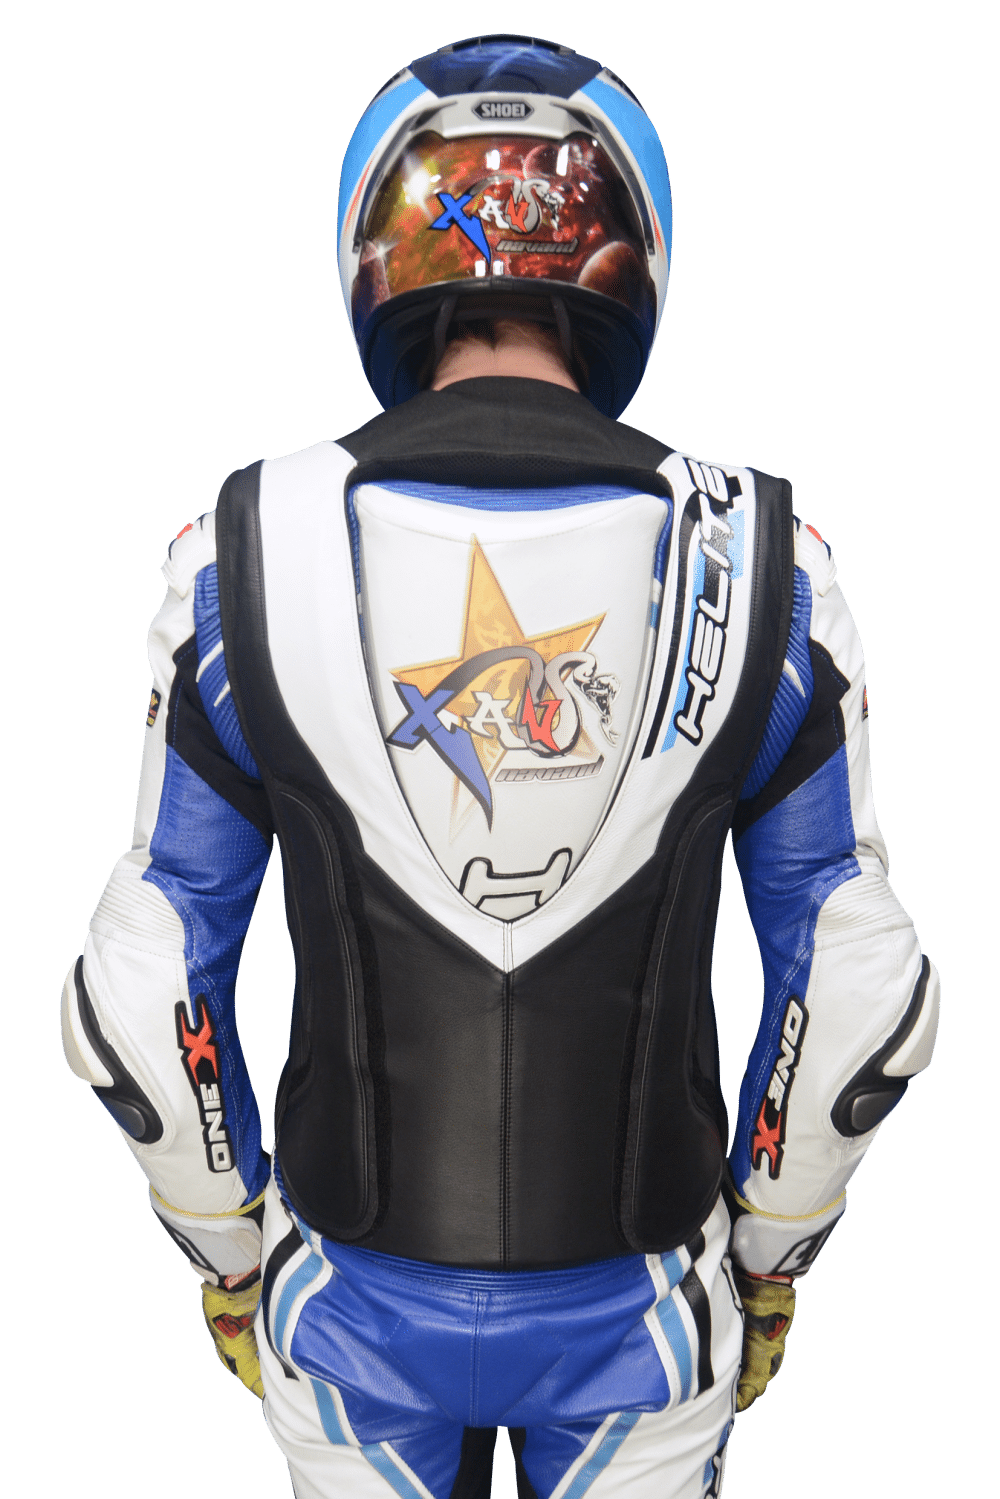 Bike rider showing the GP Air Track safety vest's back view